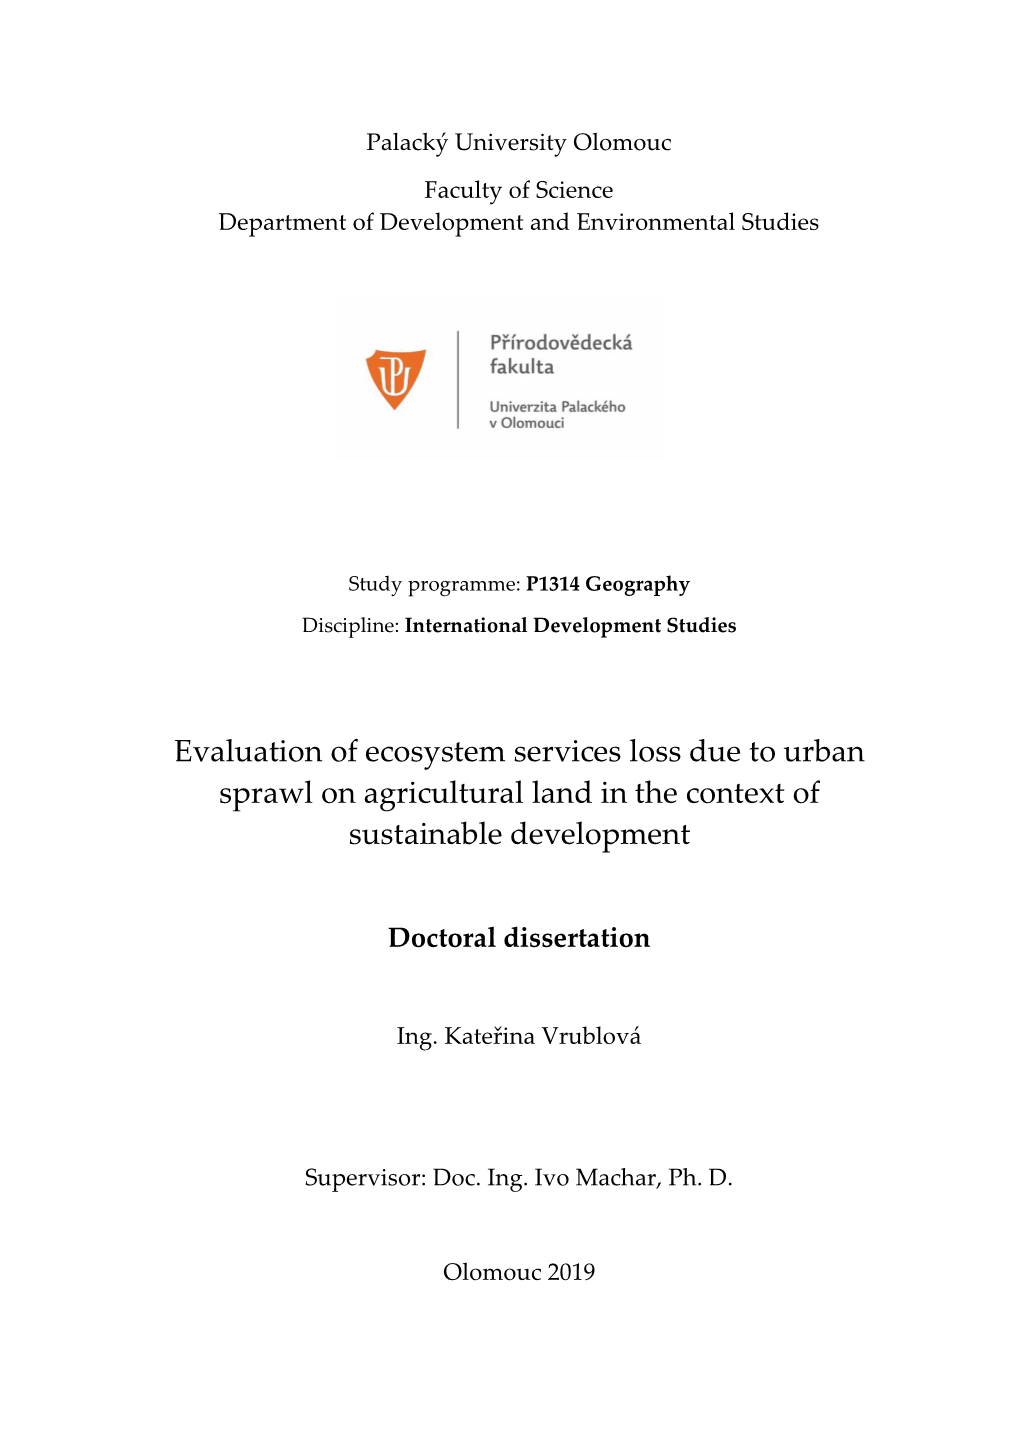 Evaluation of Ecosystem Services Loss Due to Urban Sprawl on Agricultural Land in the Context of Sustainable Development